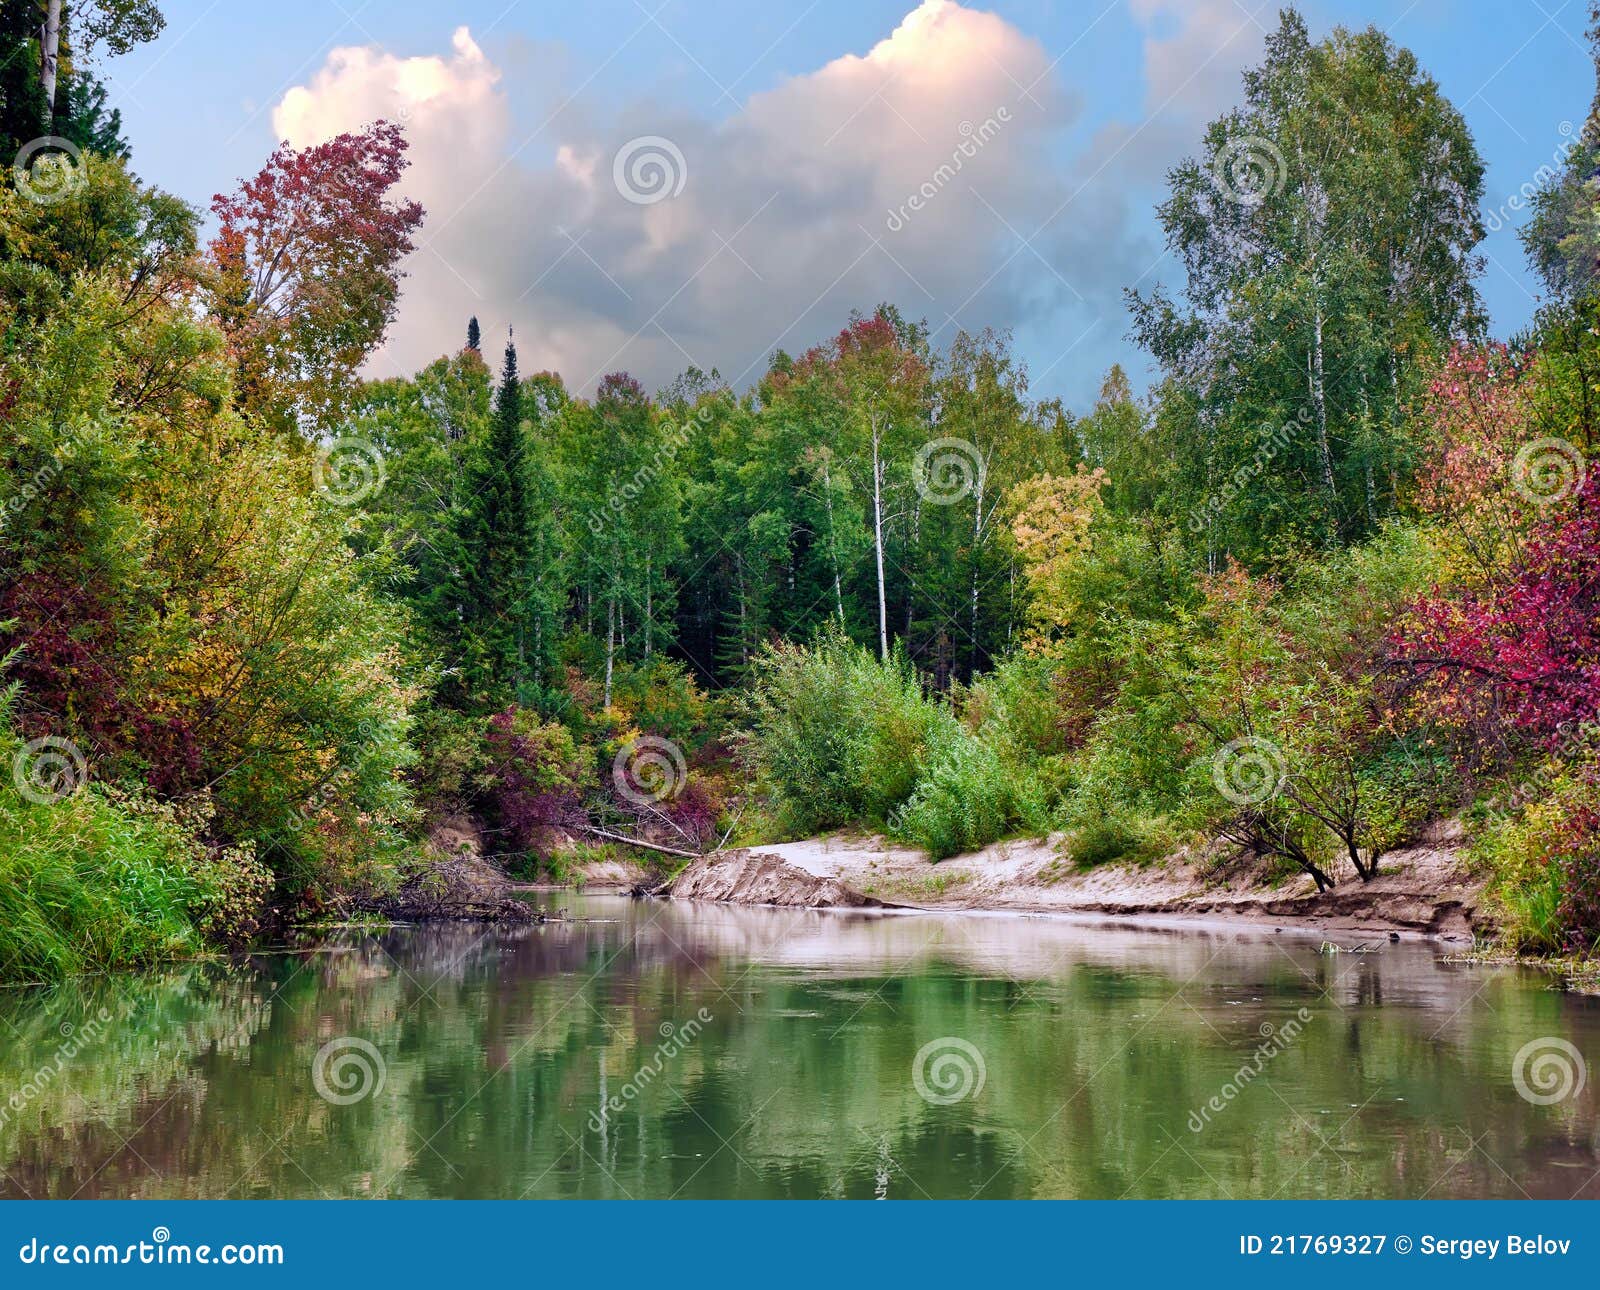 Beauty of Wild Nature in Siberia Stock Image - Image of ripple, rural:  21769327